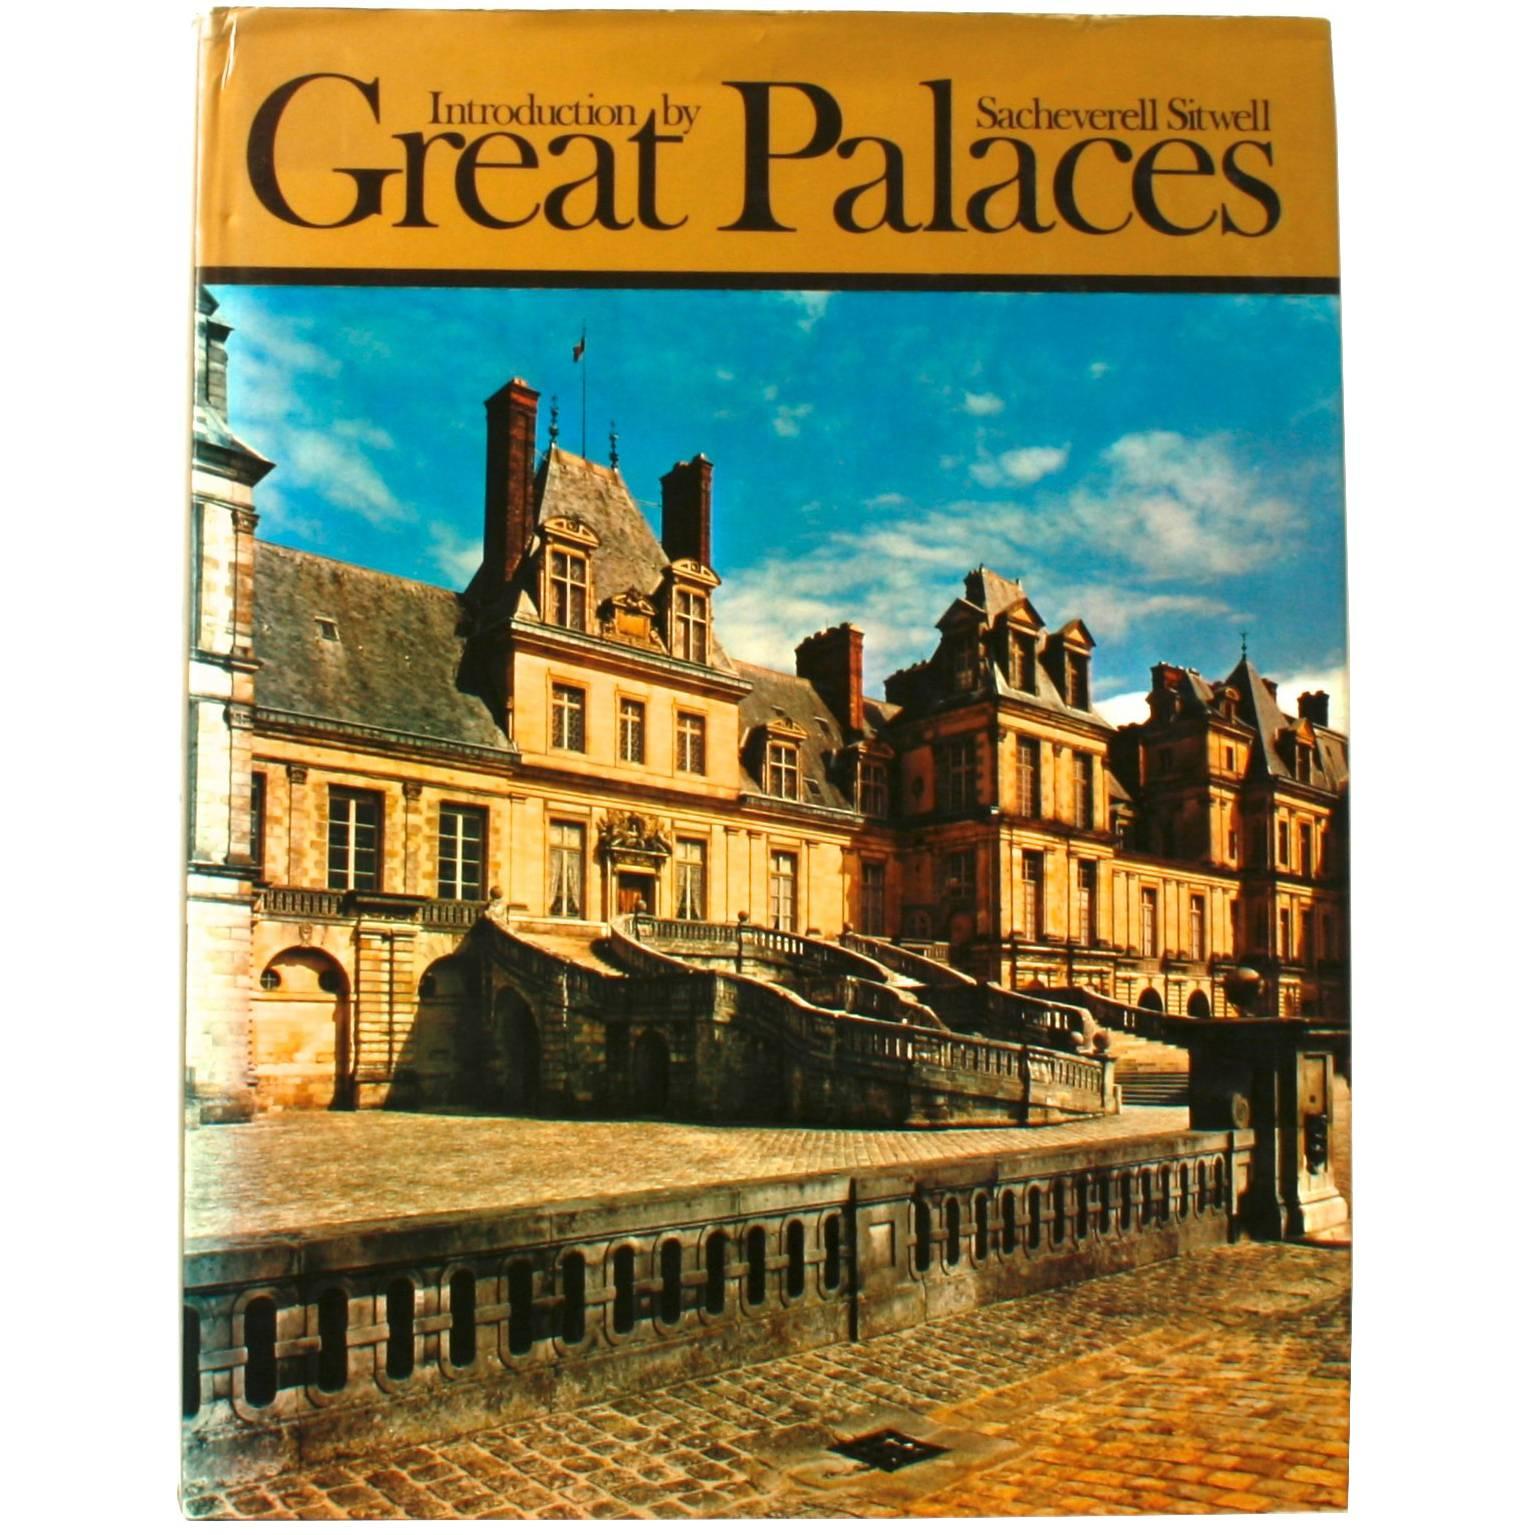 "Great Palaces" Book